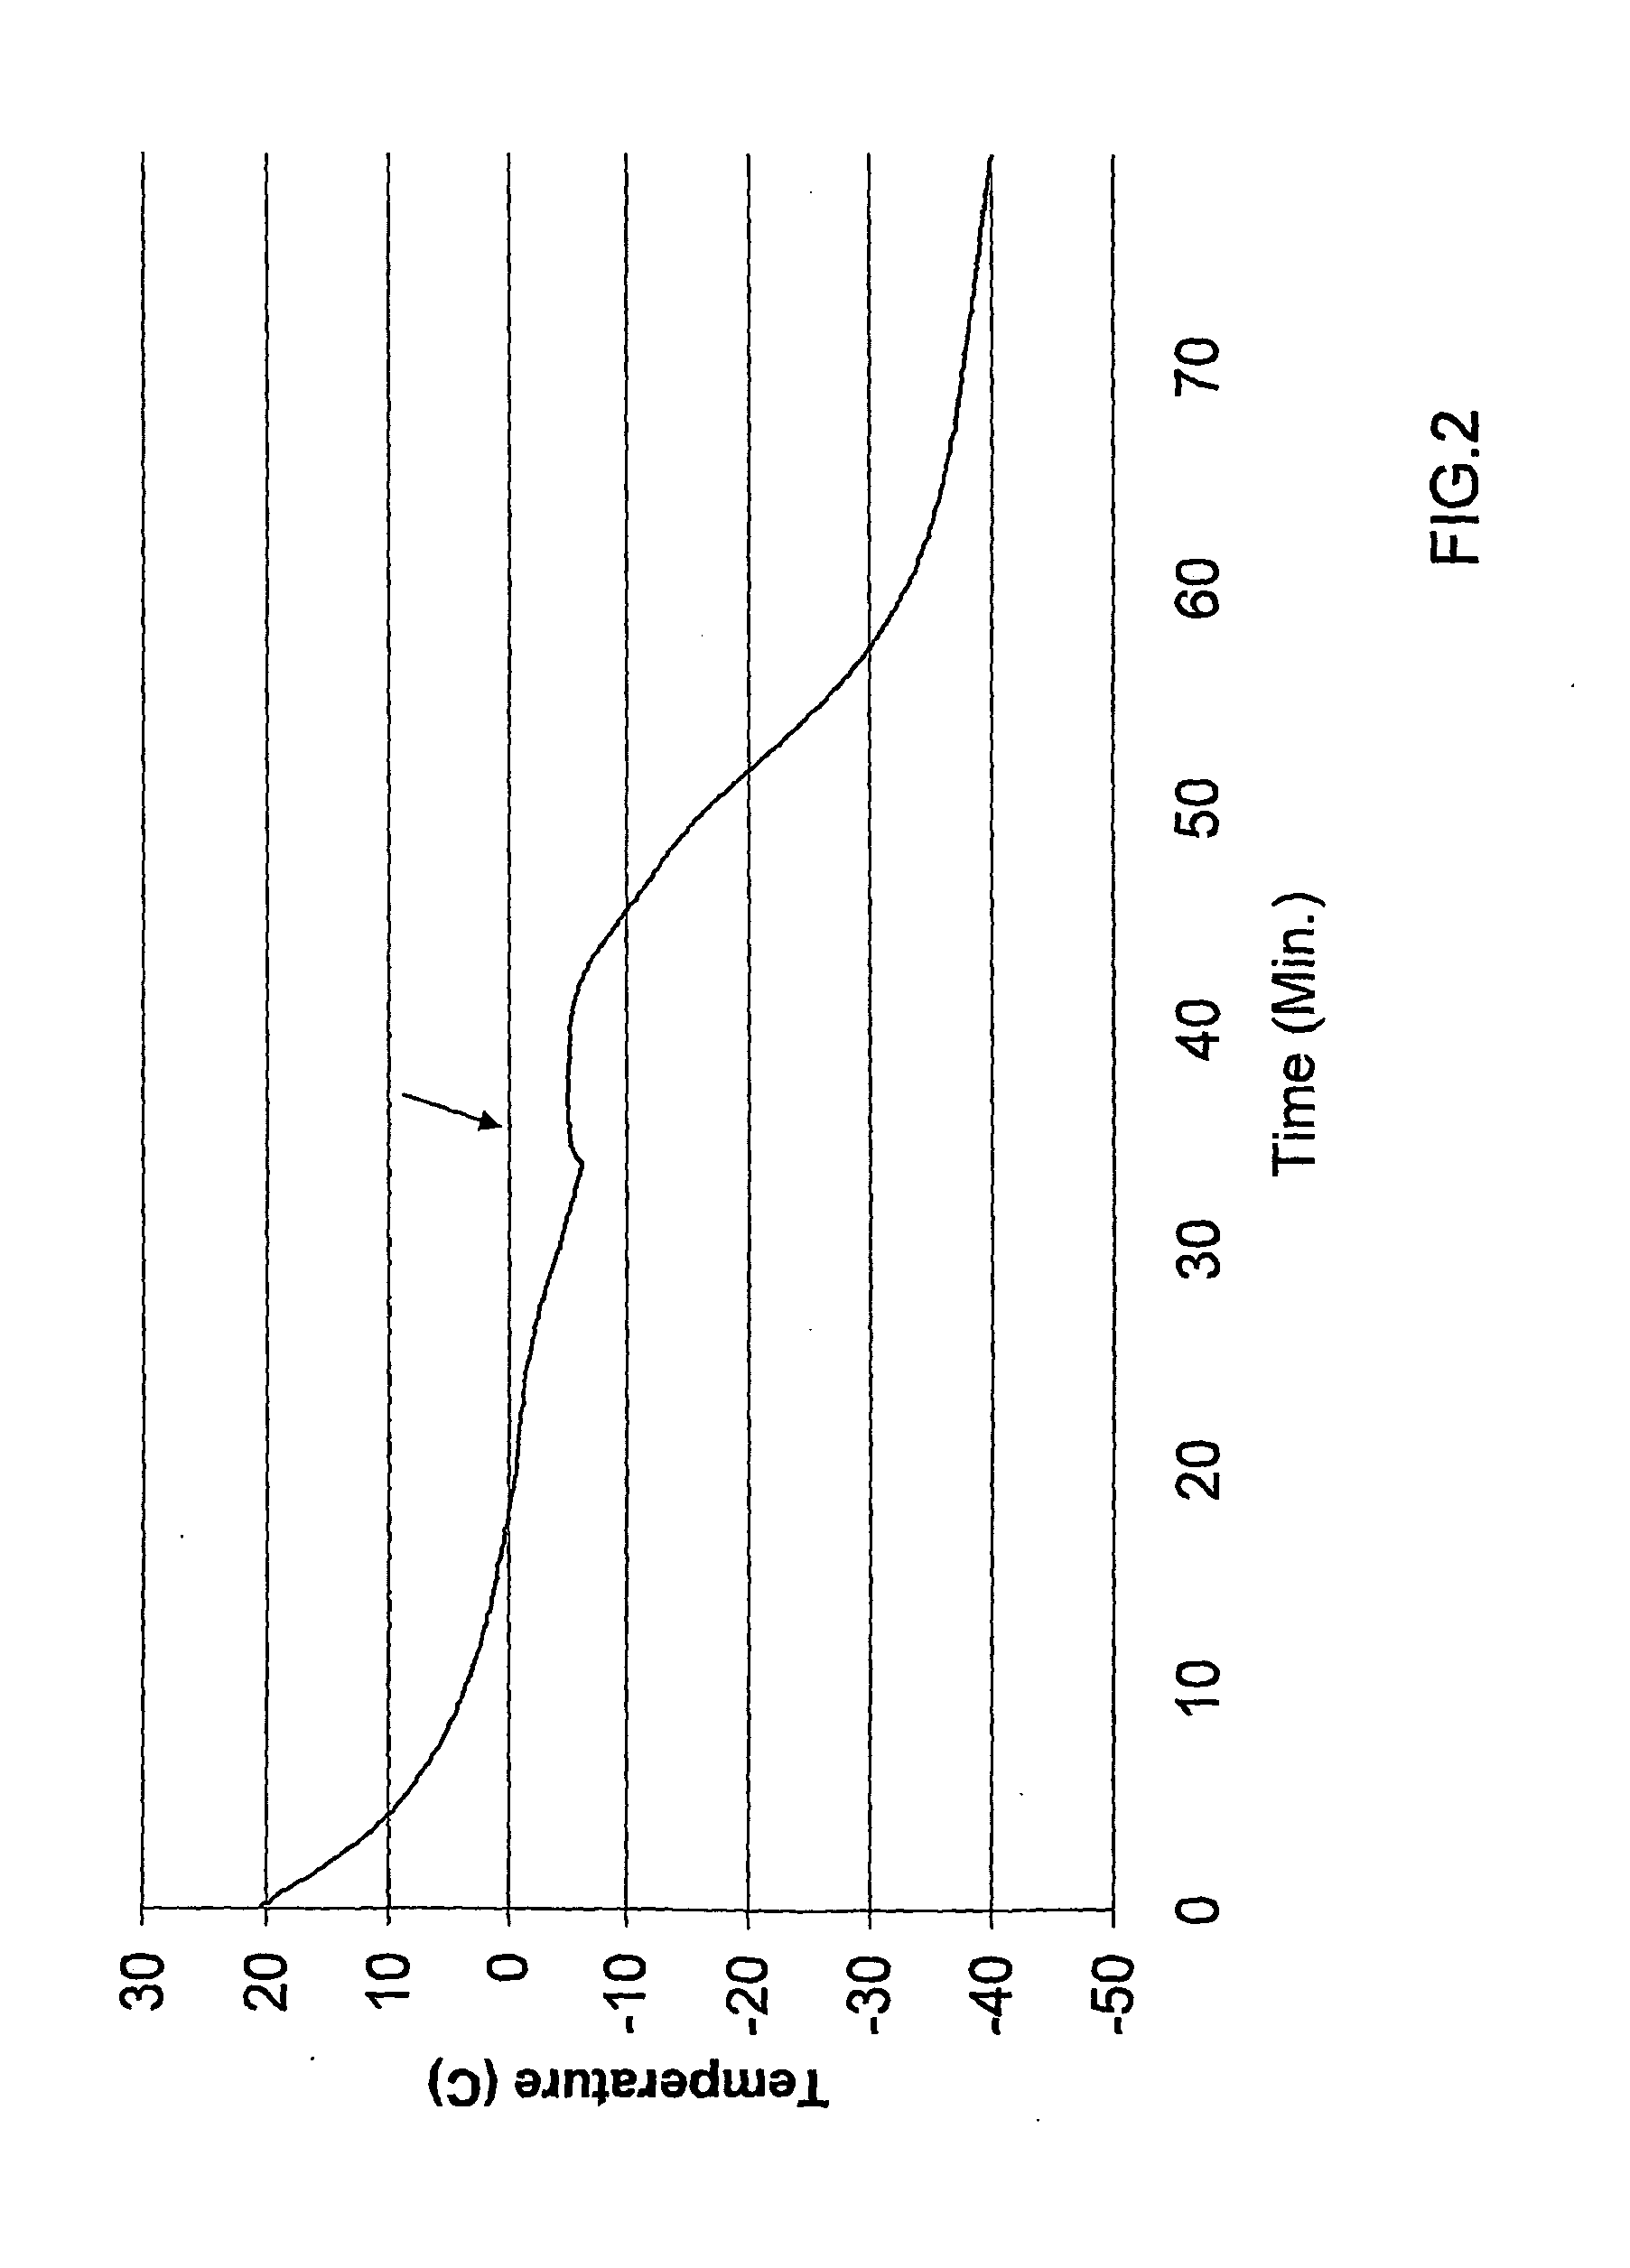 Frozen Viable Solid Organs and Method for Freezing Same